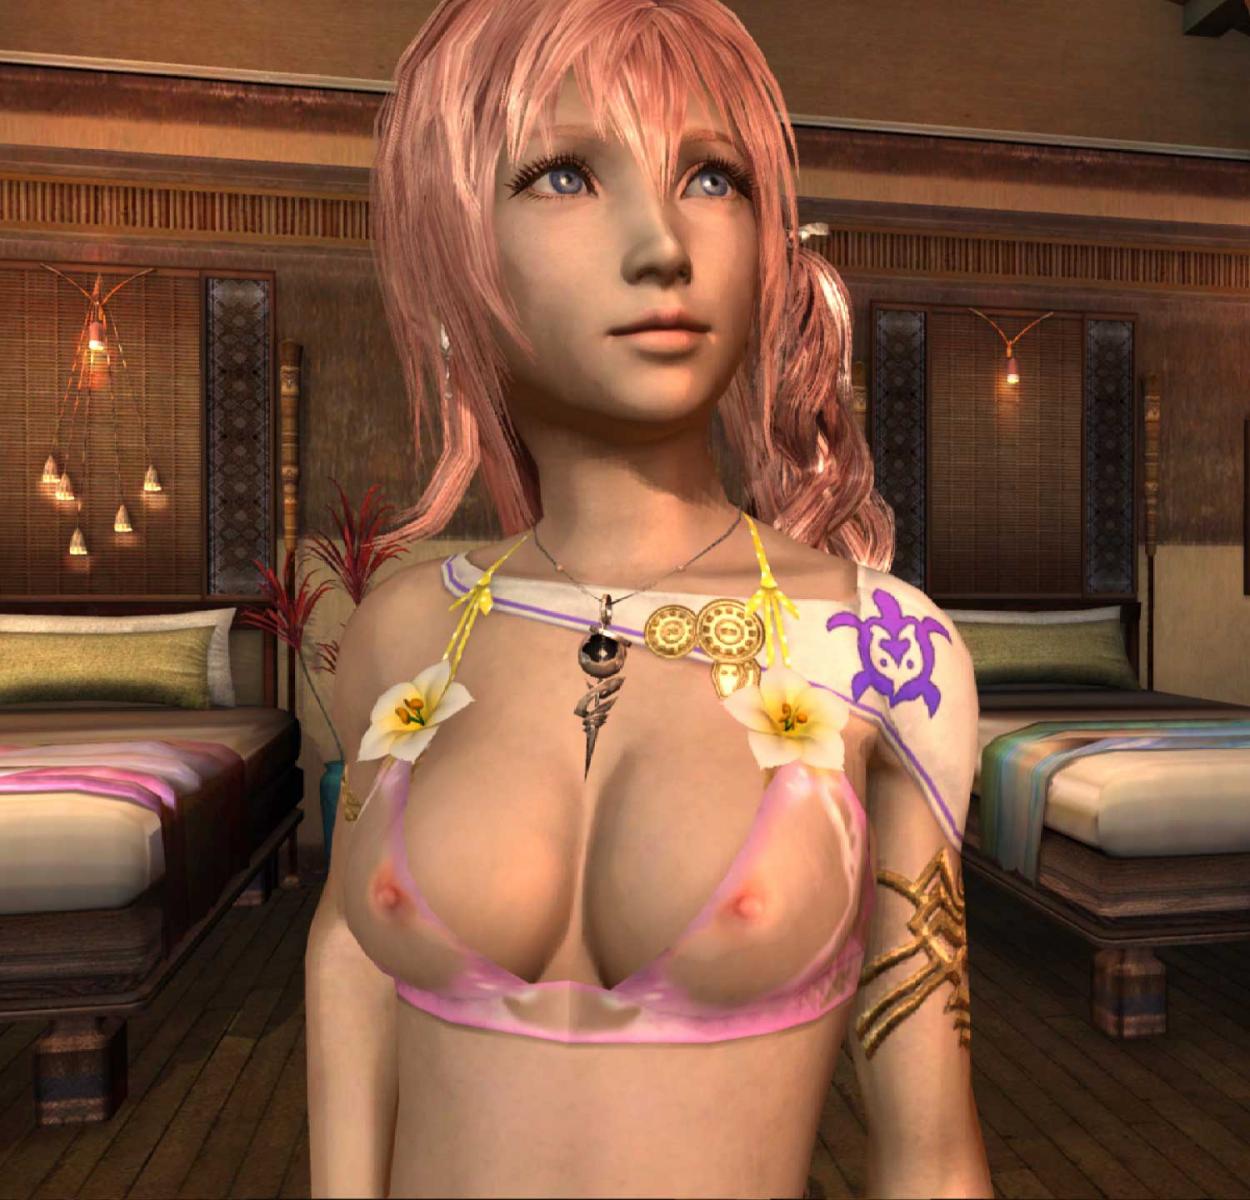 More related final fantasy naked mod.